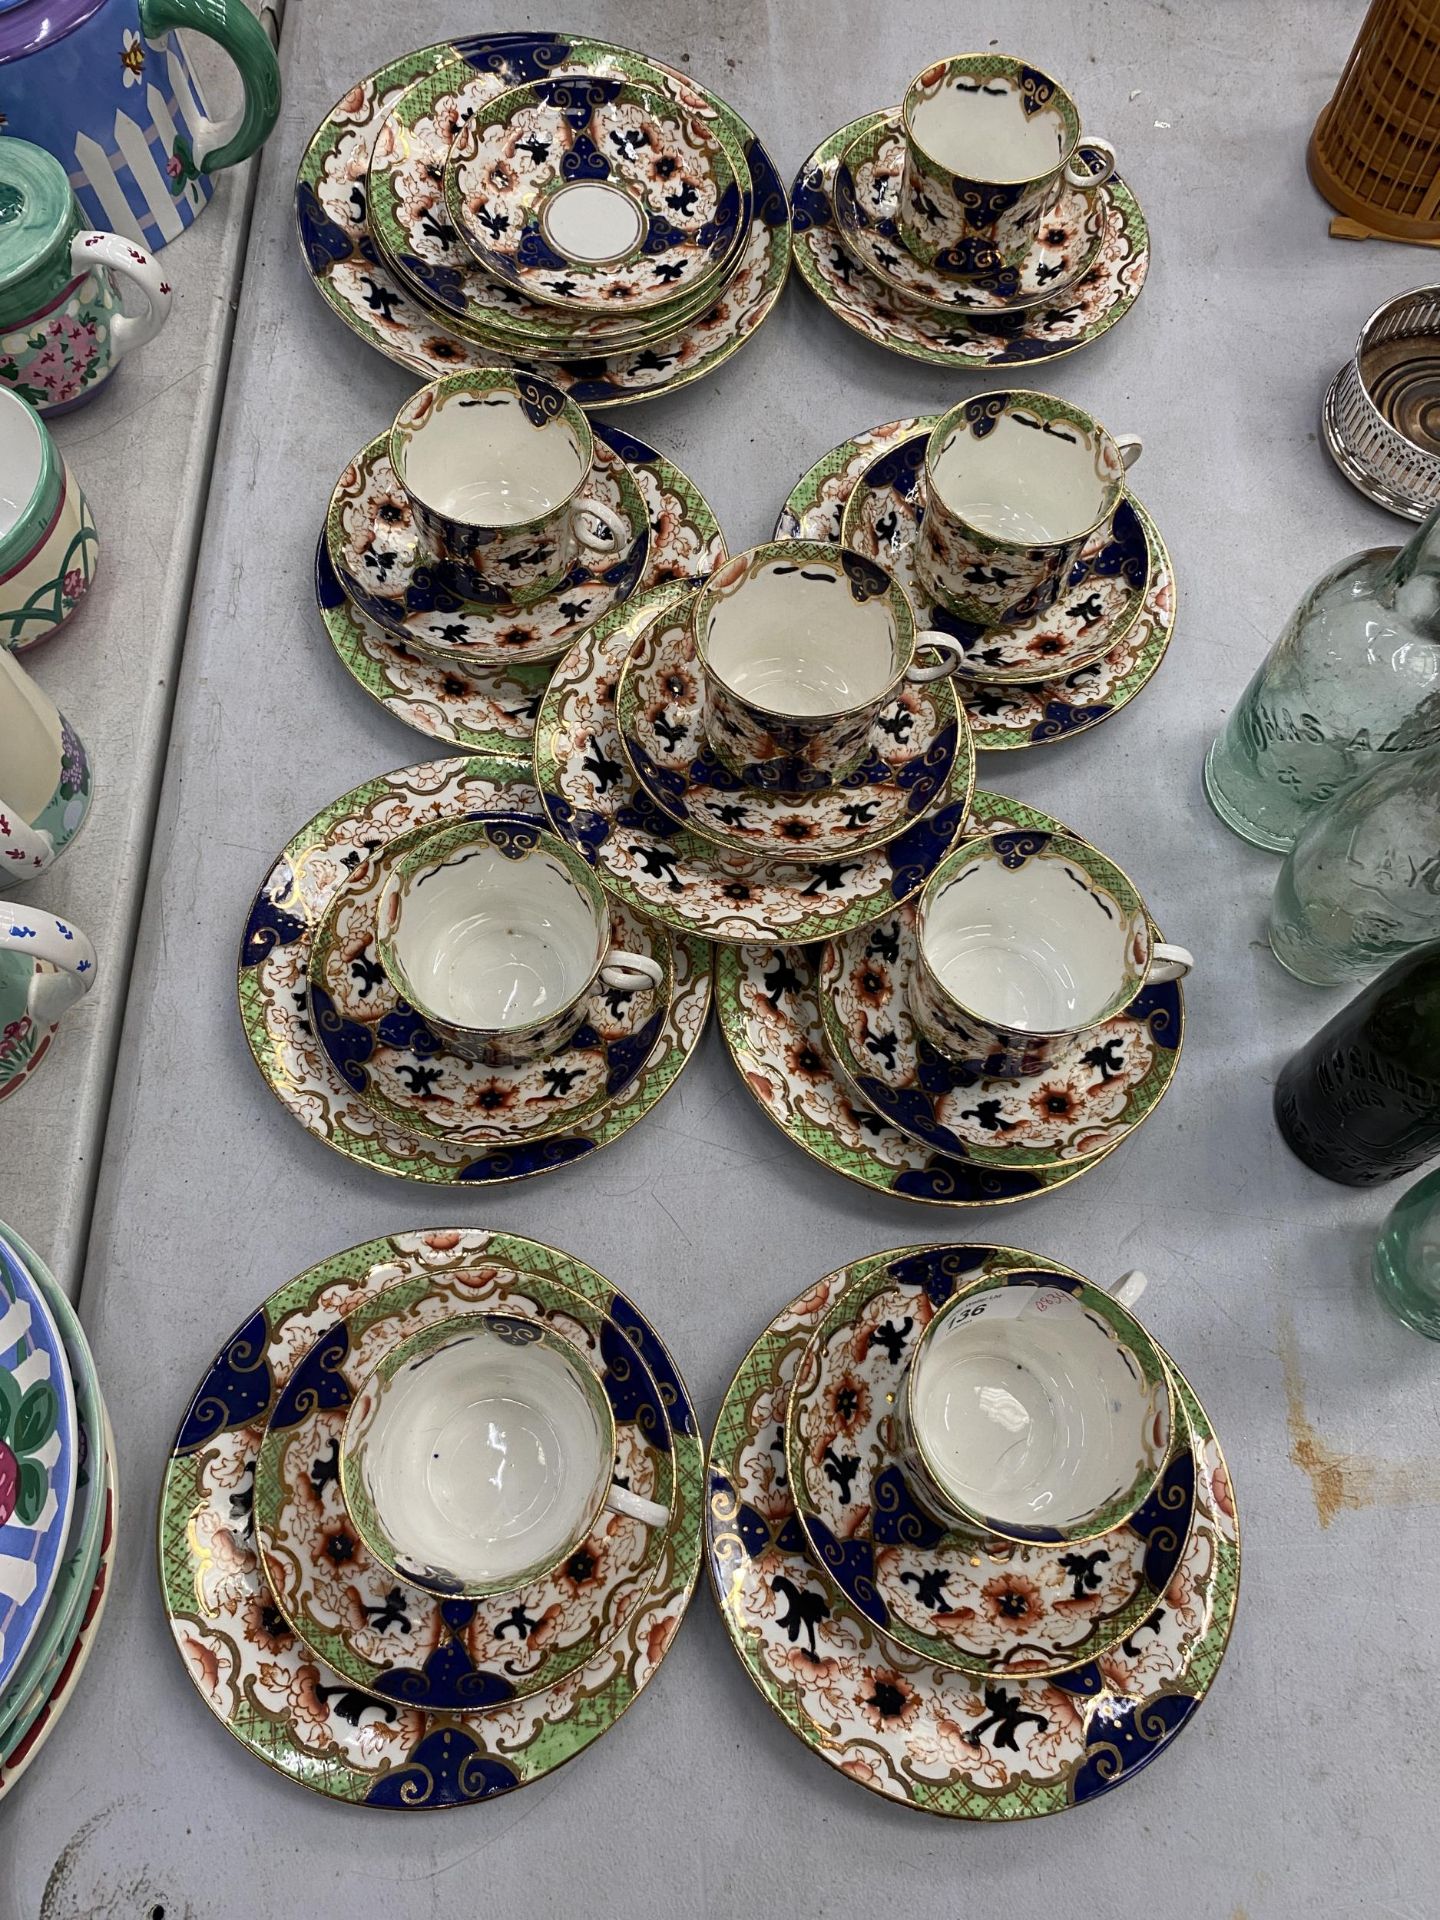 A COLLECTION OF VINTAGE ROYAL STAFFORD CUPS, SAUCERS AND SIDE PLATES